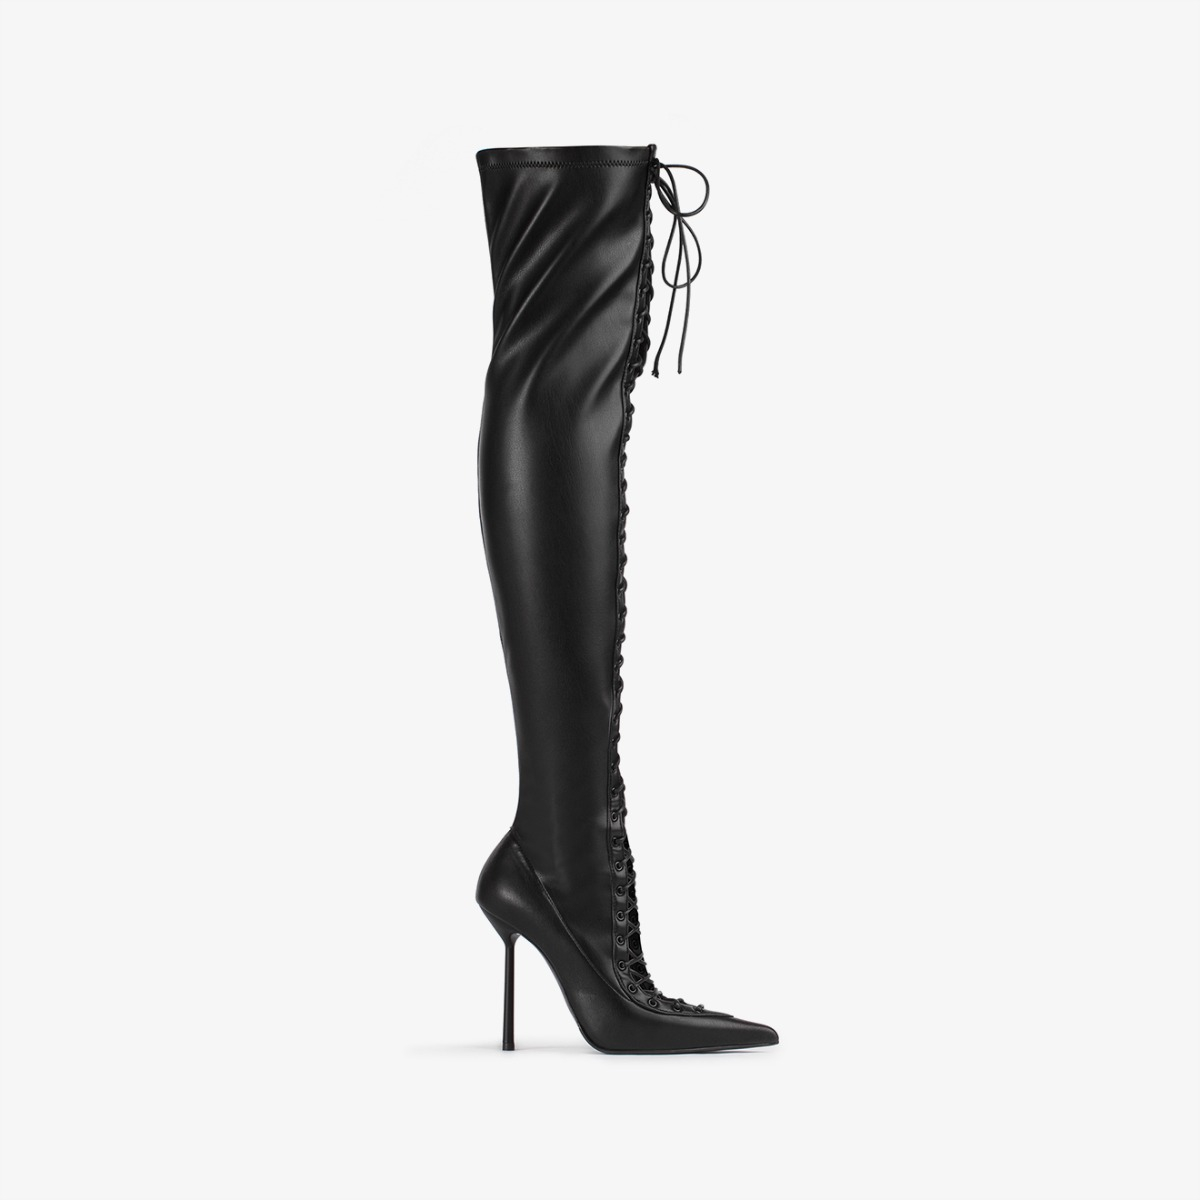 COLETTE THIGH-HIGH BOOT 120 mm - Le Silla | Official Online Store